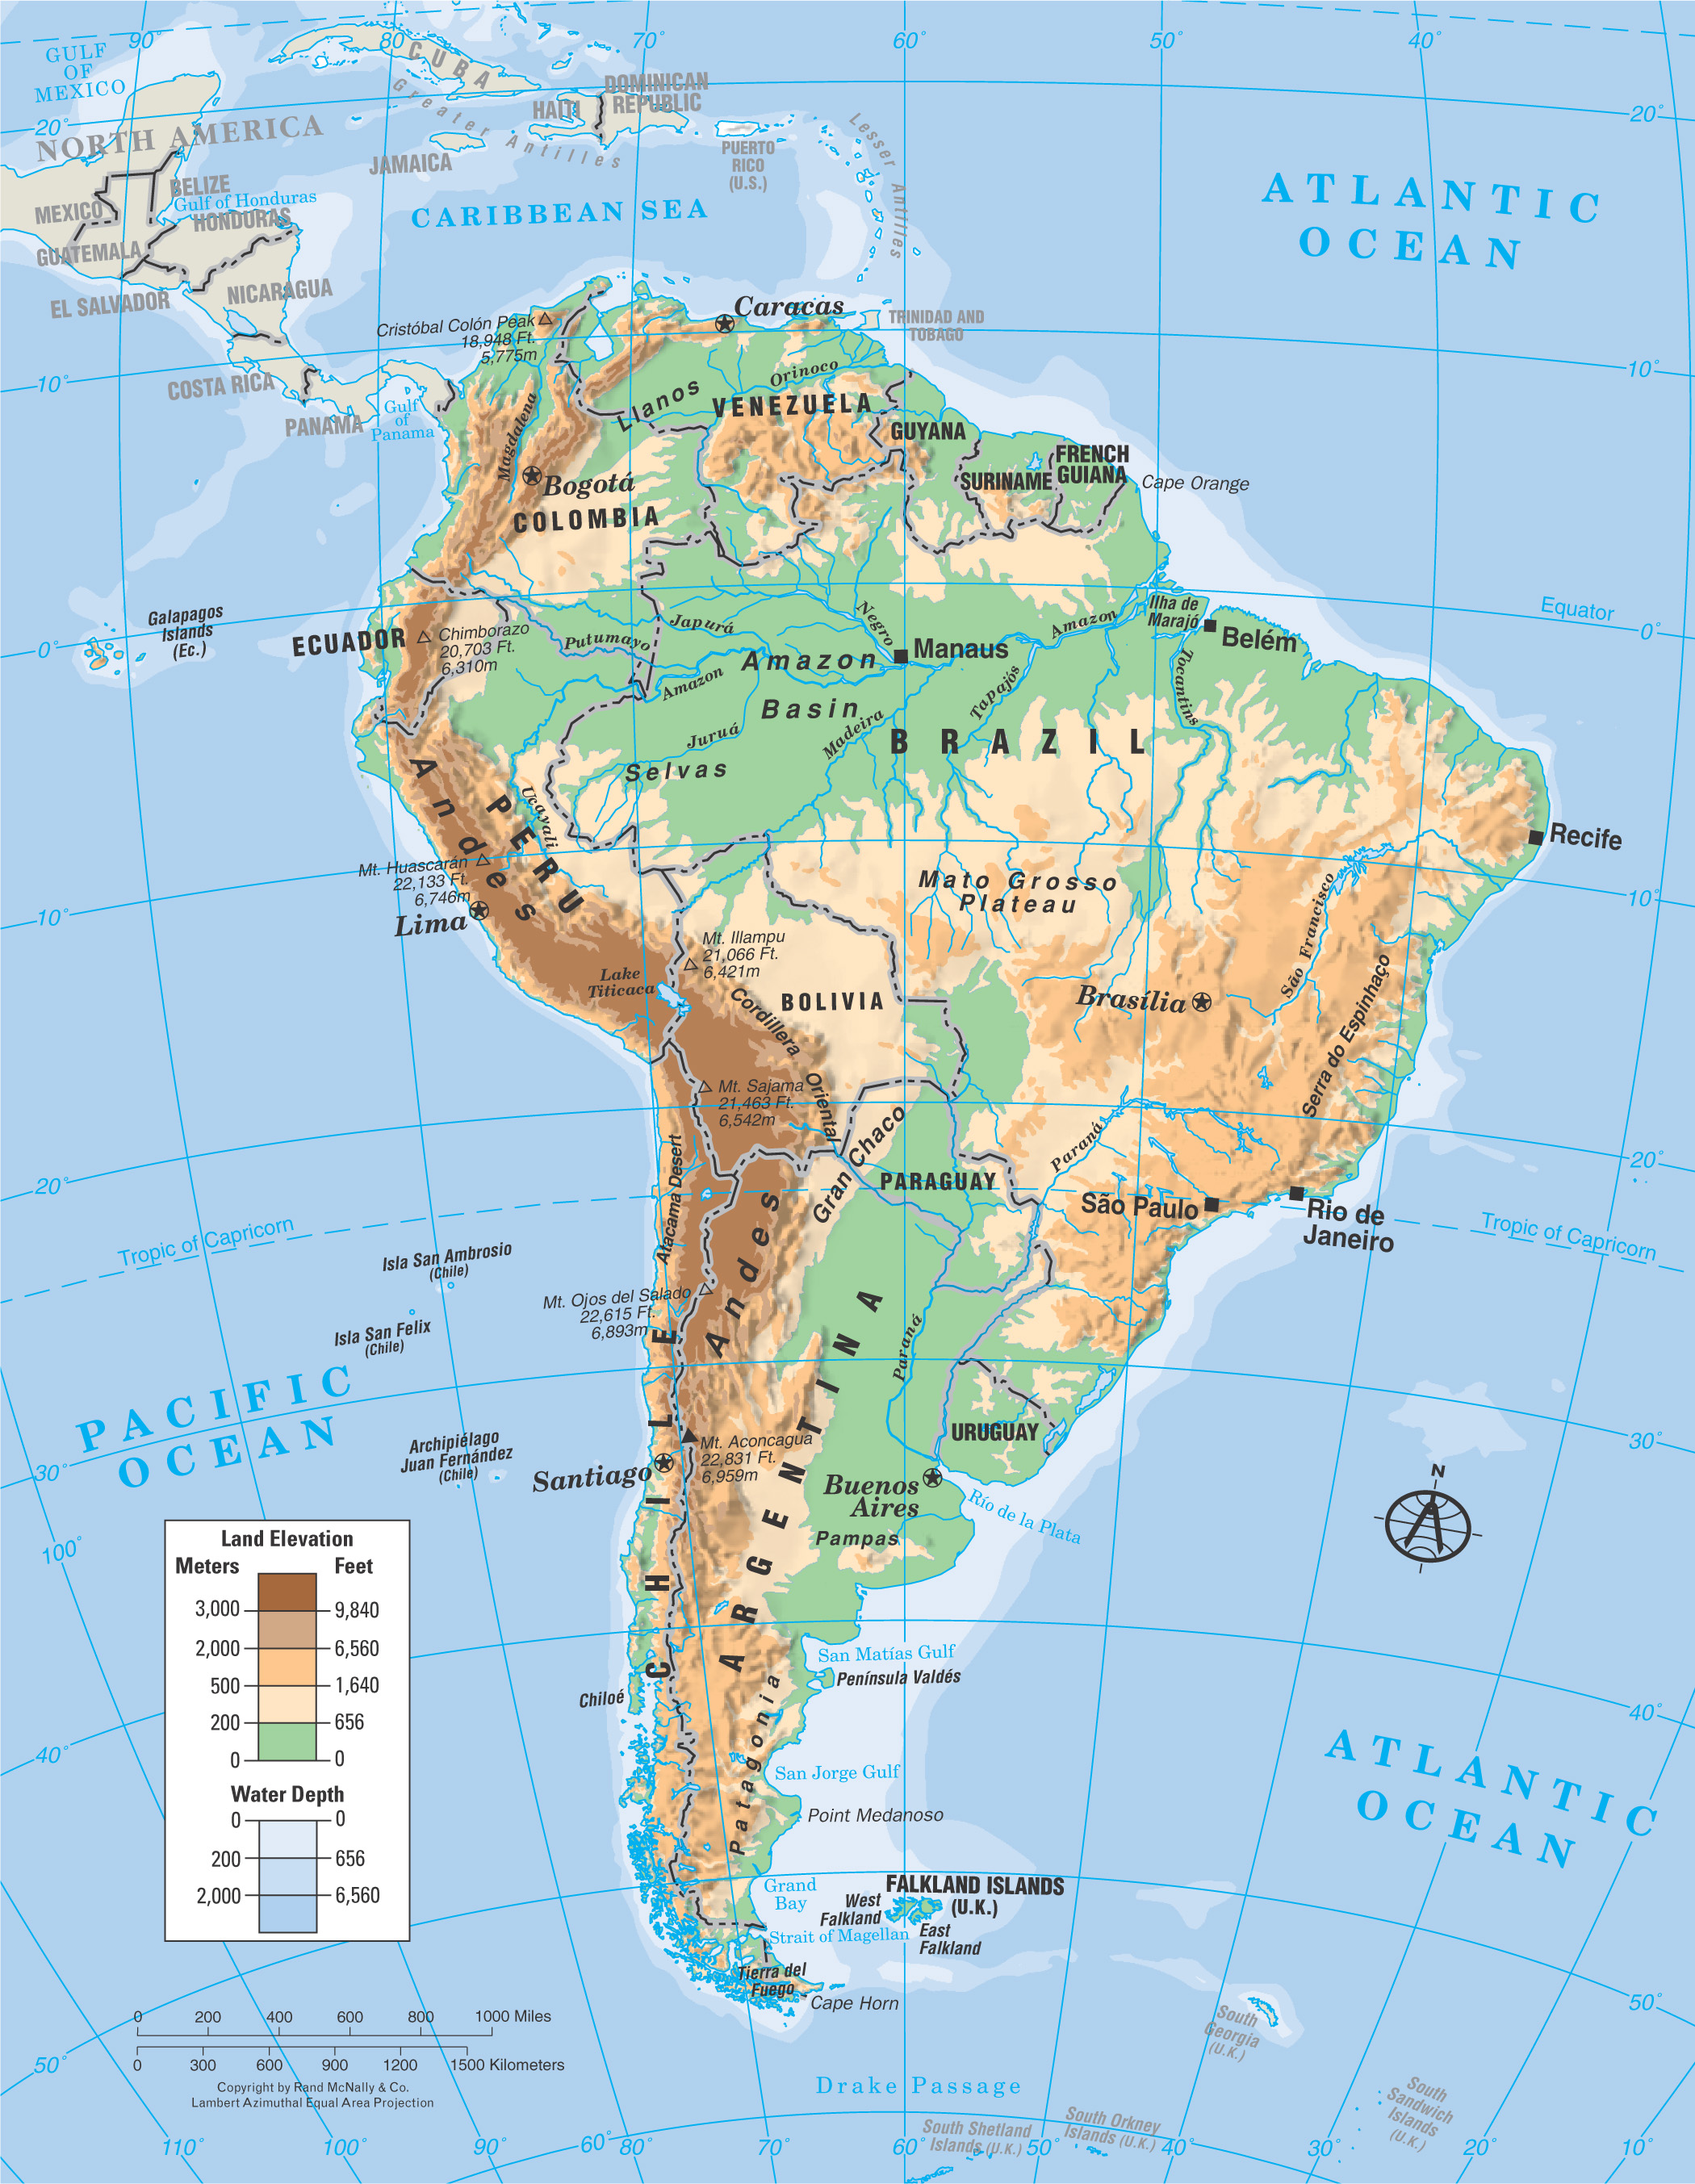 physical map of South America: mountains, plains, rivers, etc are shaded with different colors